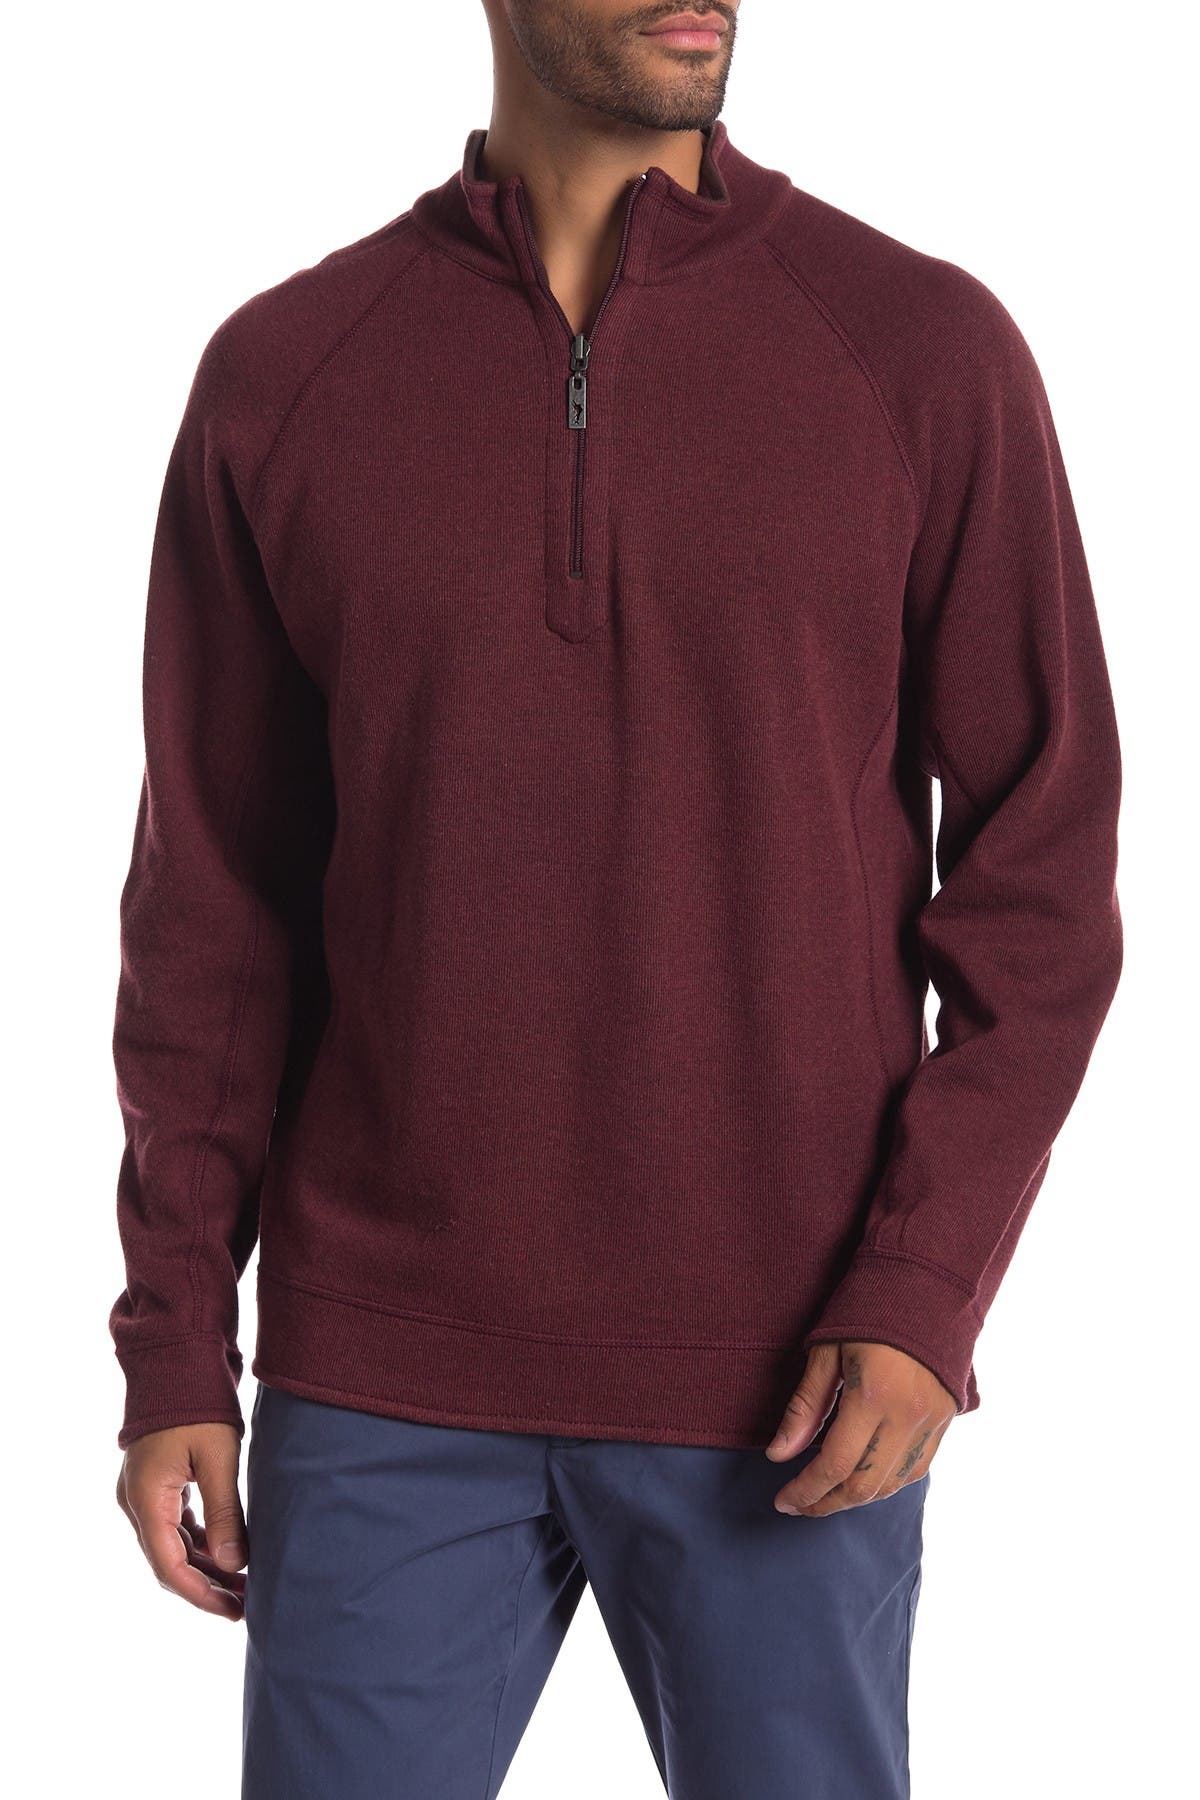 tommy bahama reversible pullover